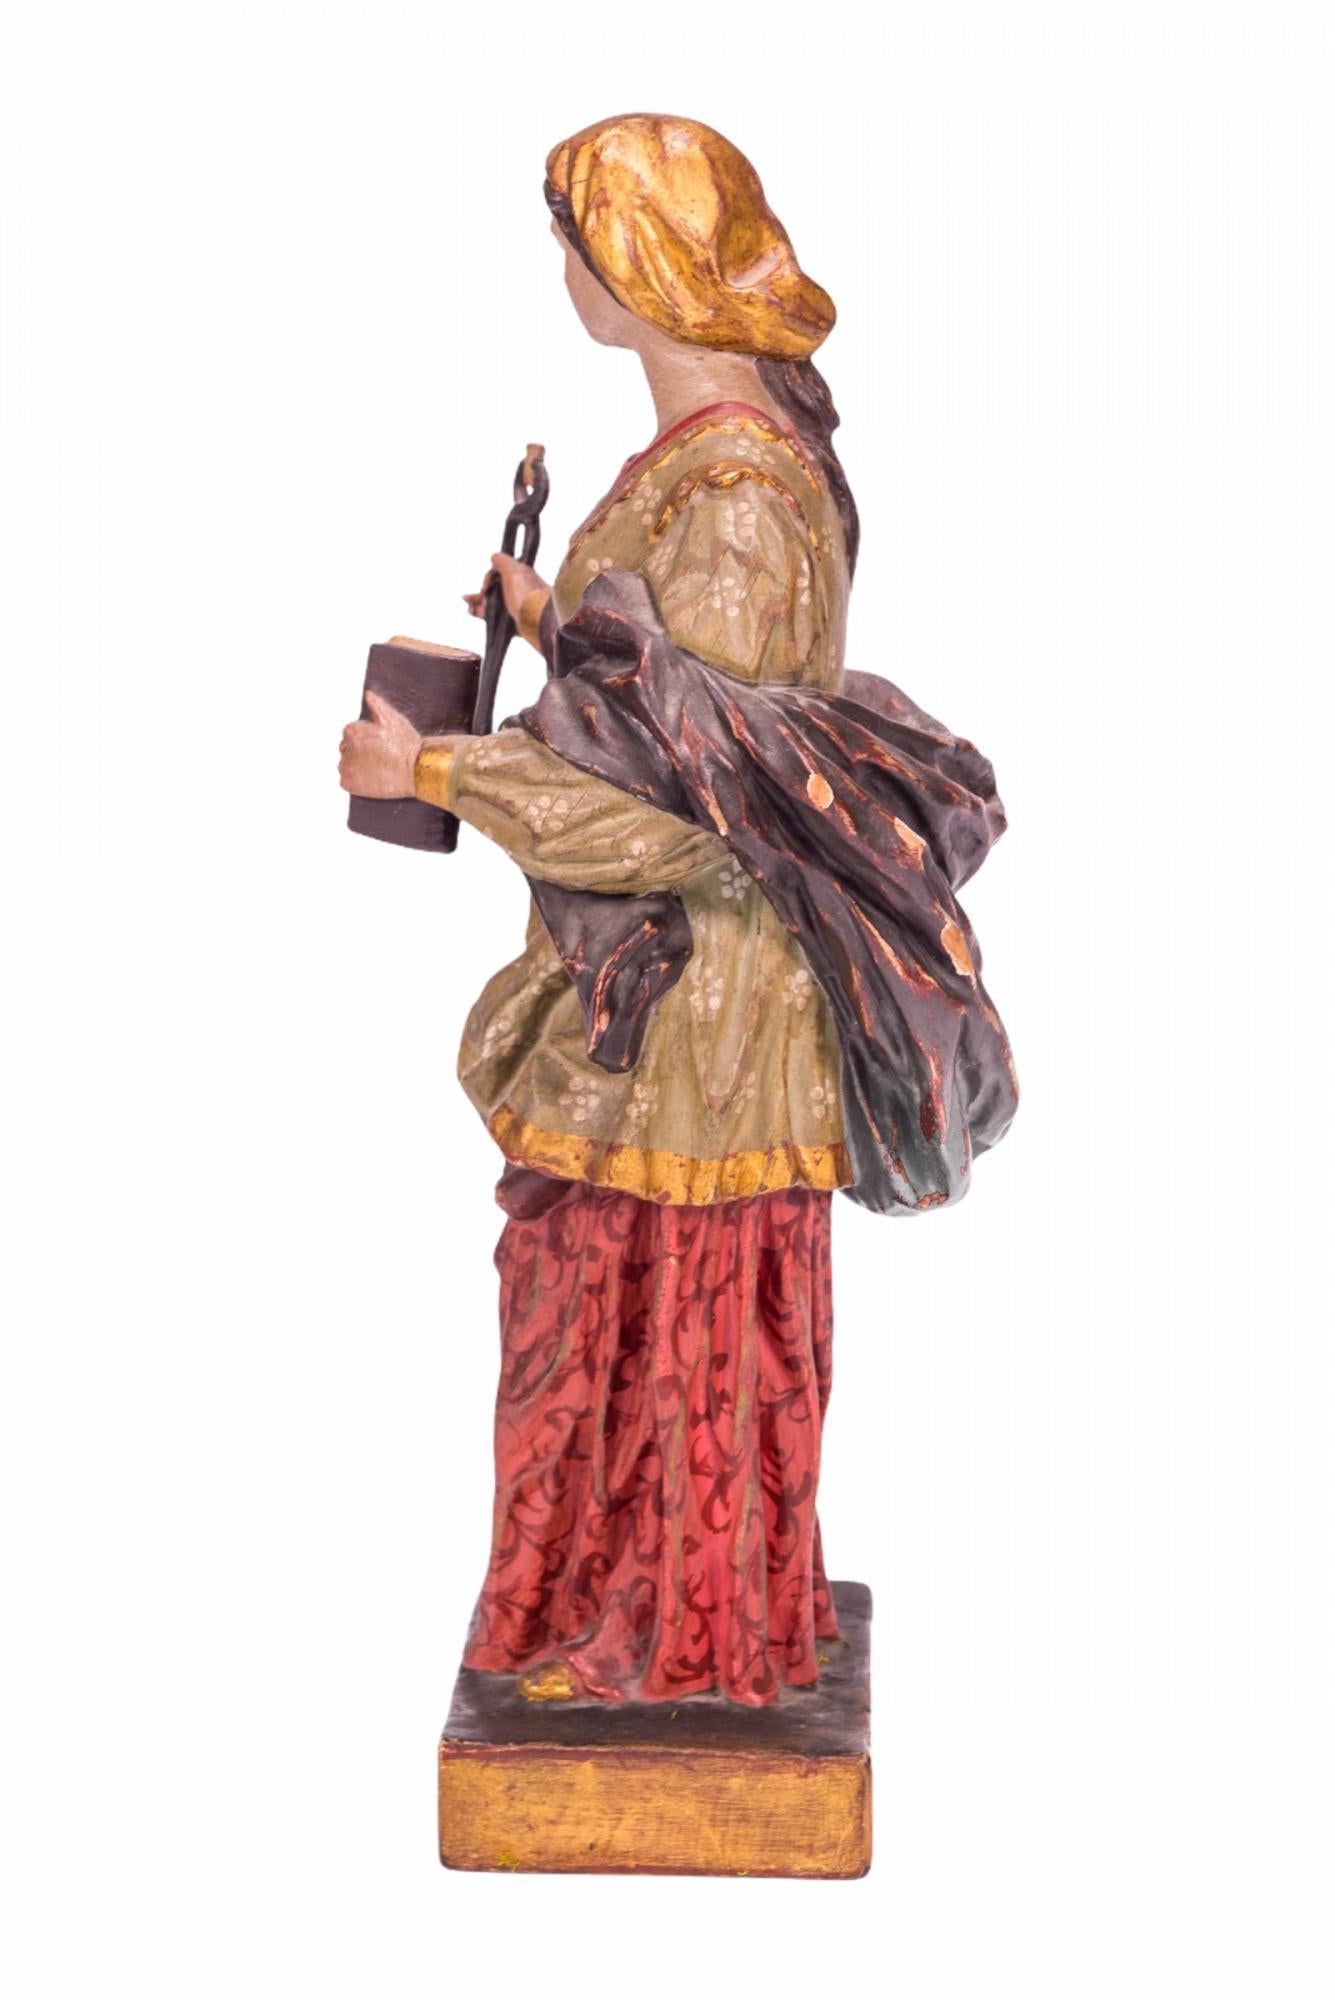 Early 18th Century Spanish carved-wood polychromed sculpture of Saint Apollonia of Alexandria, Patron of Dentistry. This actual sculpture appears in the book Santa Apolonia En España and belonged to Dr. Gonzalez Rex, who was known to be an avid